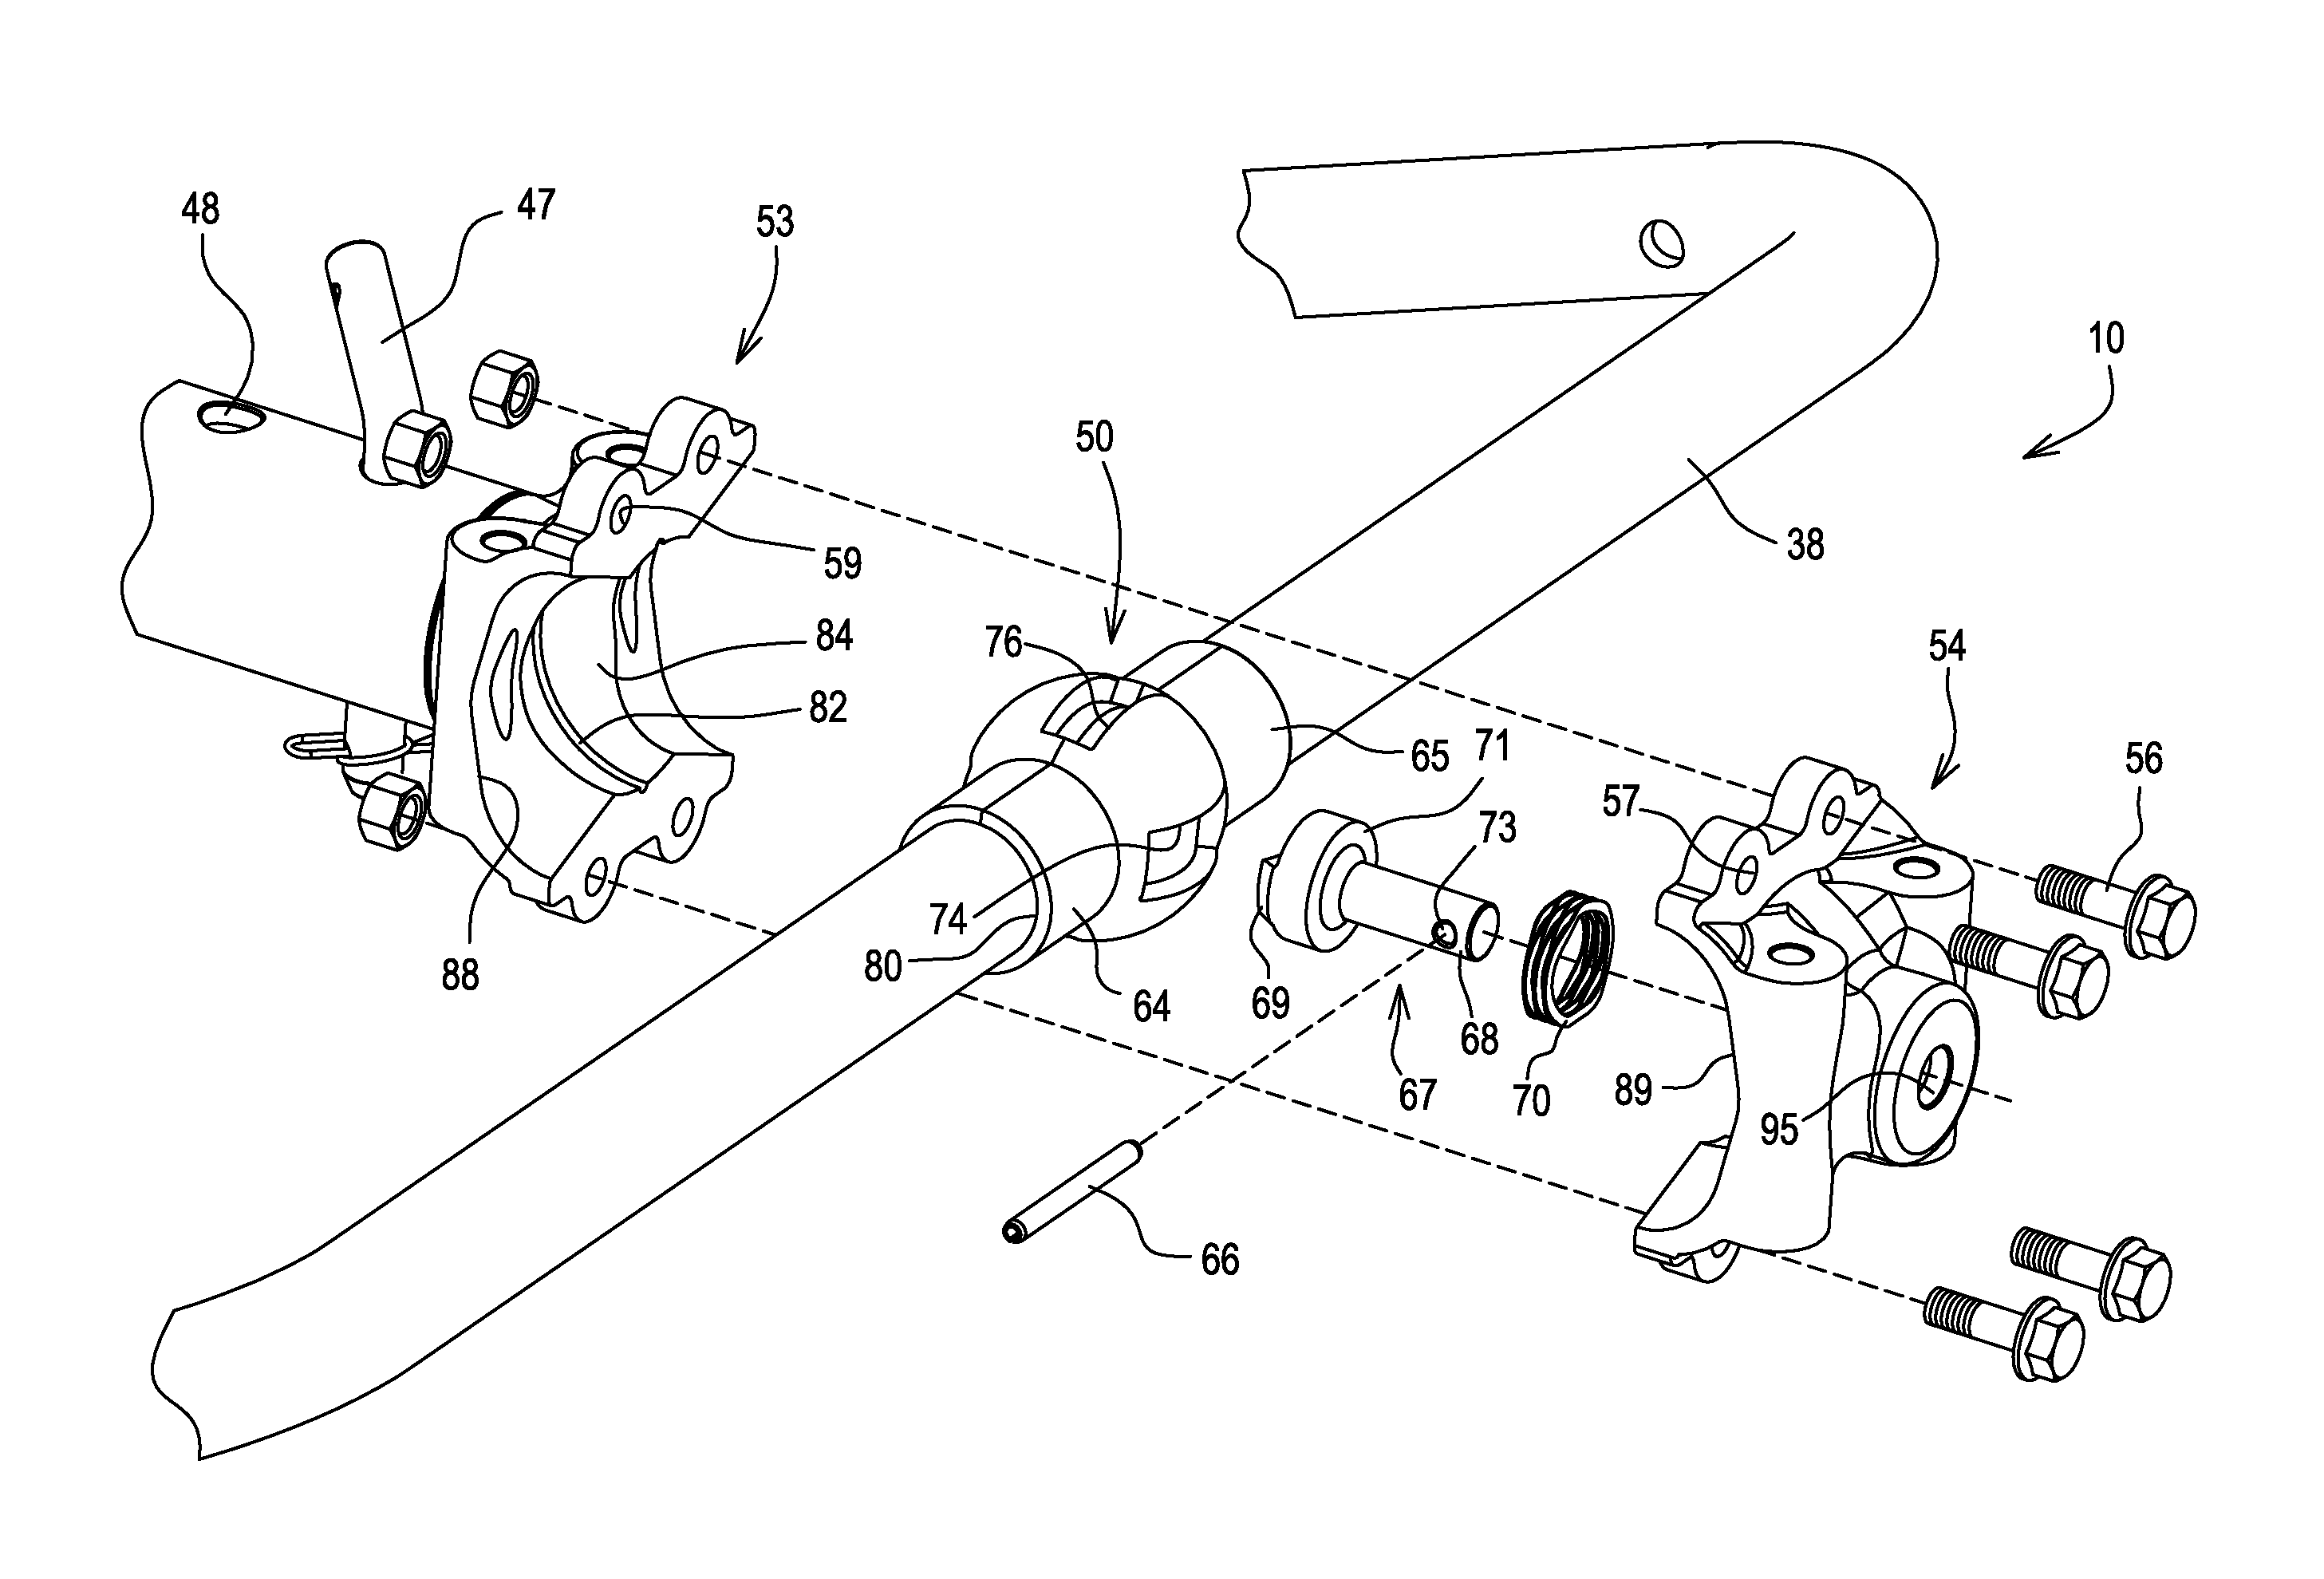 Cutting unit mounting device